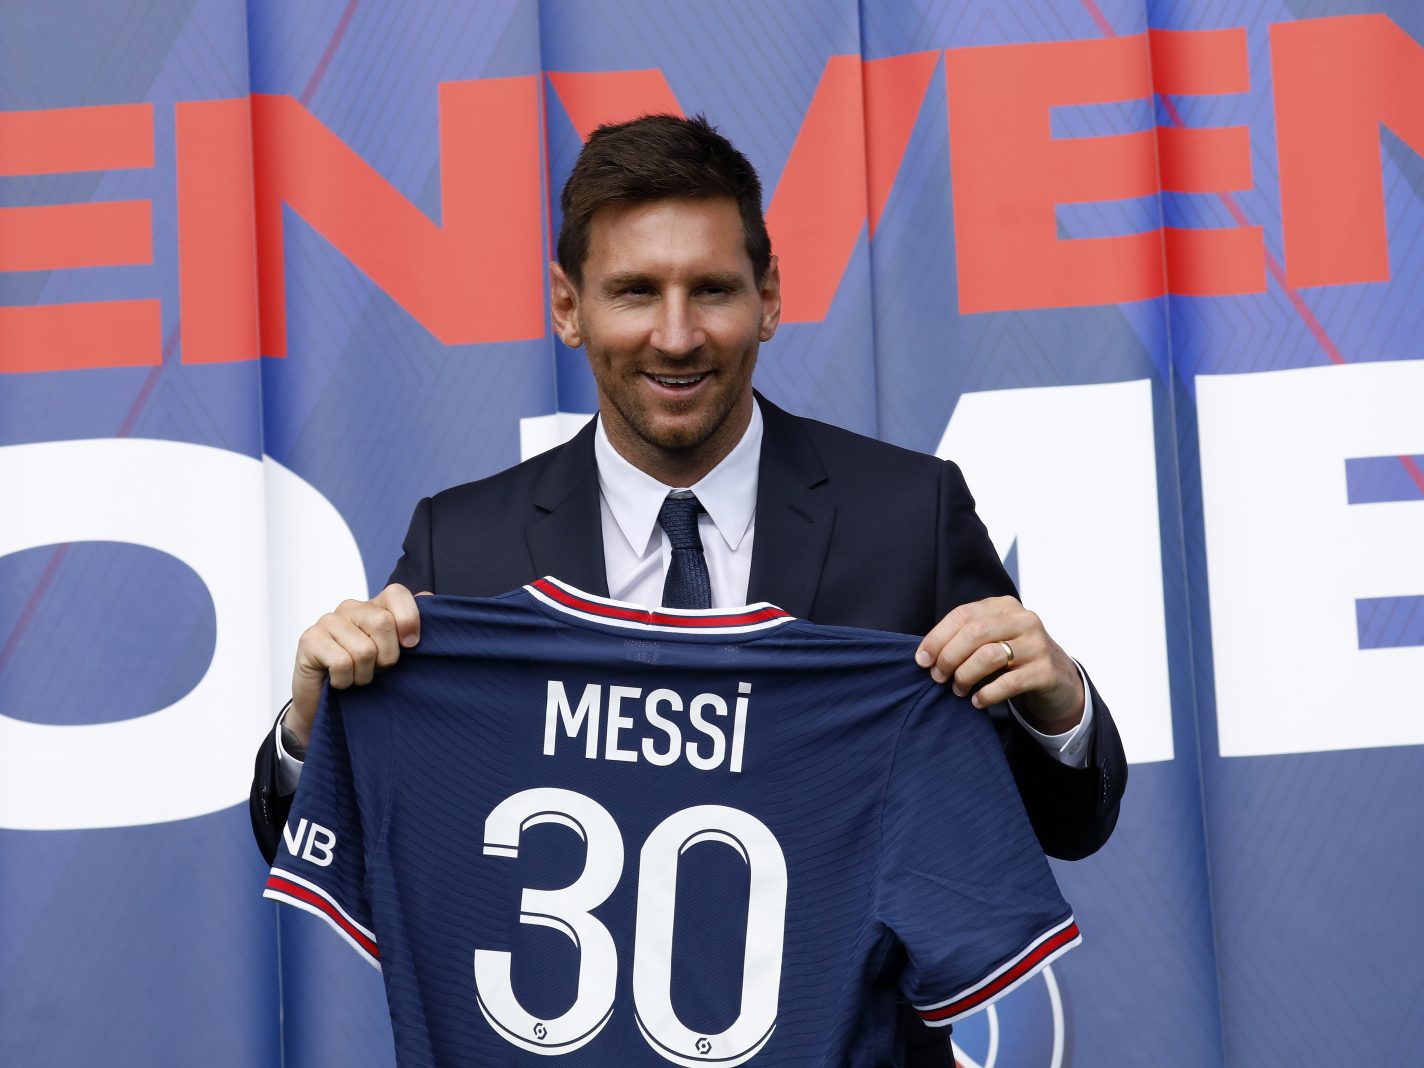 Lionel Messi Joins Paris SaintGermain After 21 Years with Barcelona